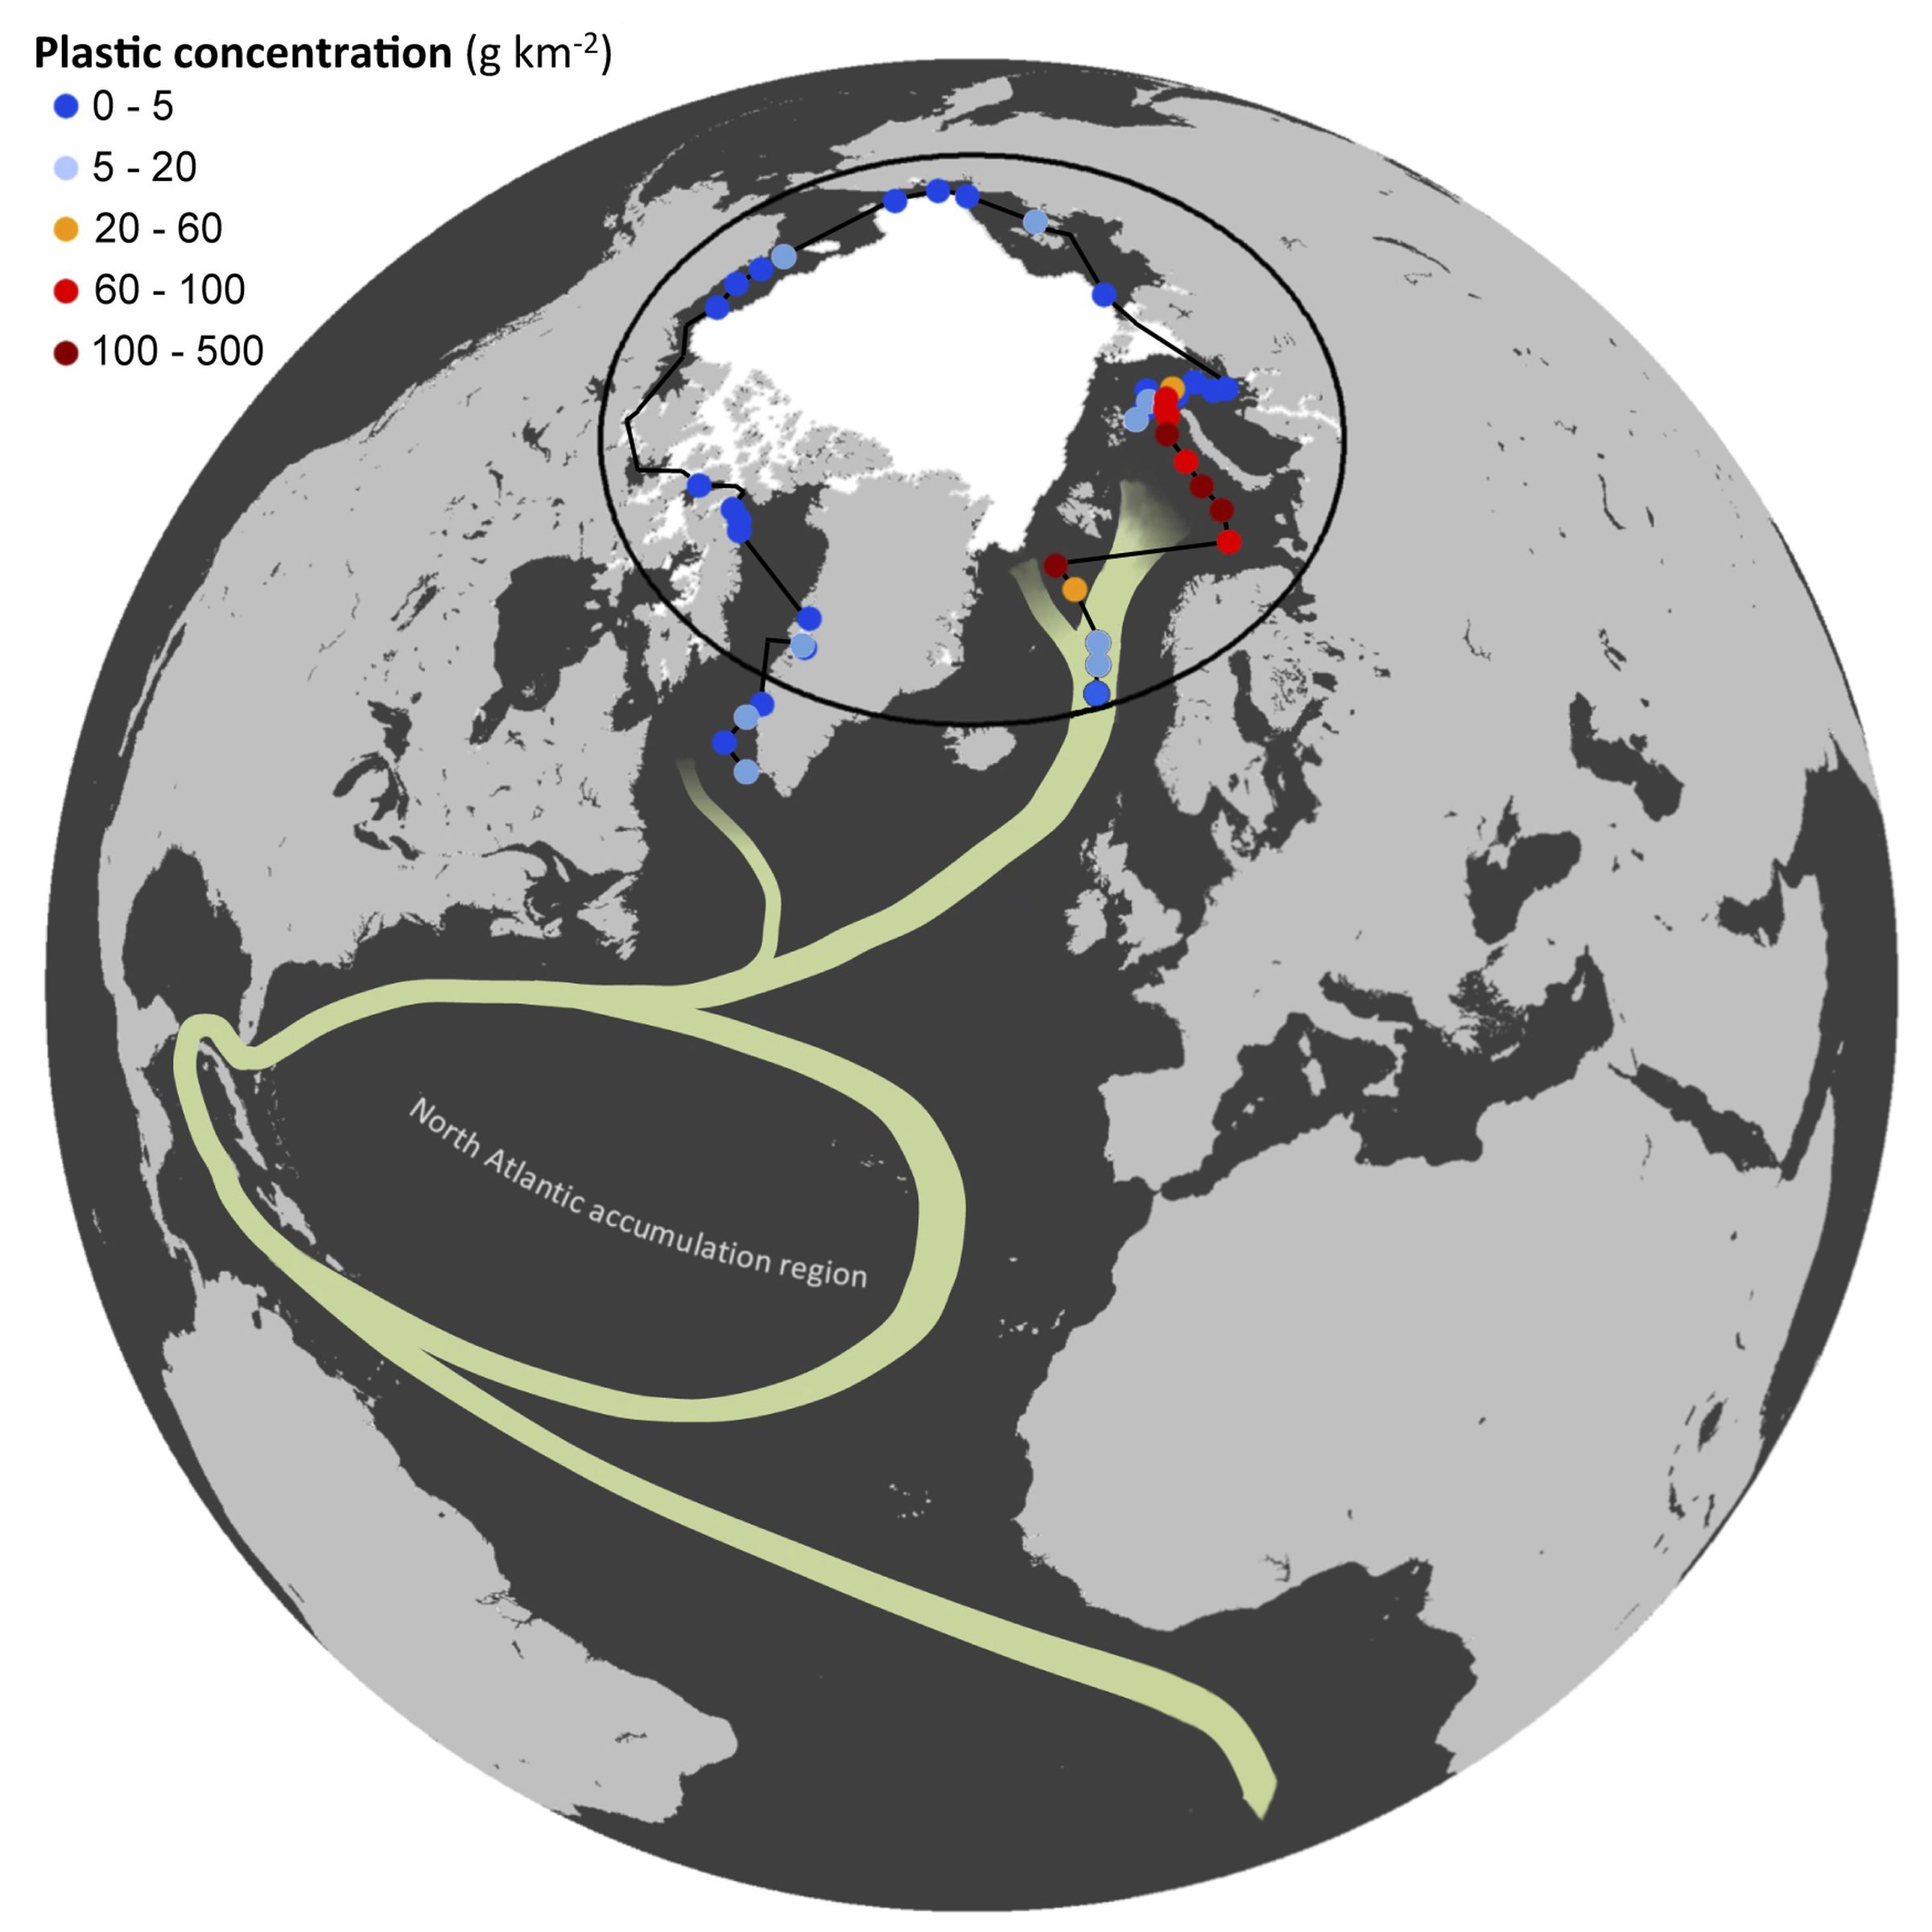 The colored dots indicate where the expedition collected samples. The white section is the polar ice cap. The green lines are currents: the North Atlantic Subtropical Ocean Gyre and the Global Thermohaline Circulation. Image by Andres Cozar.